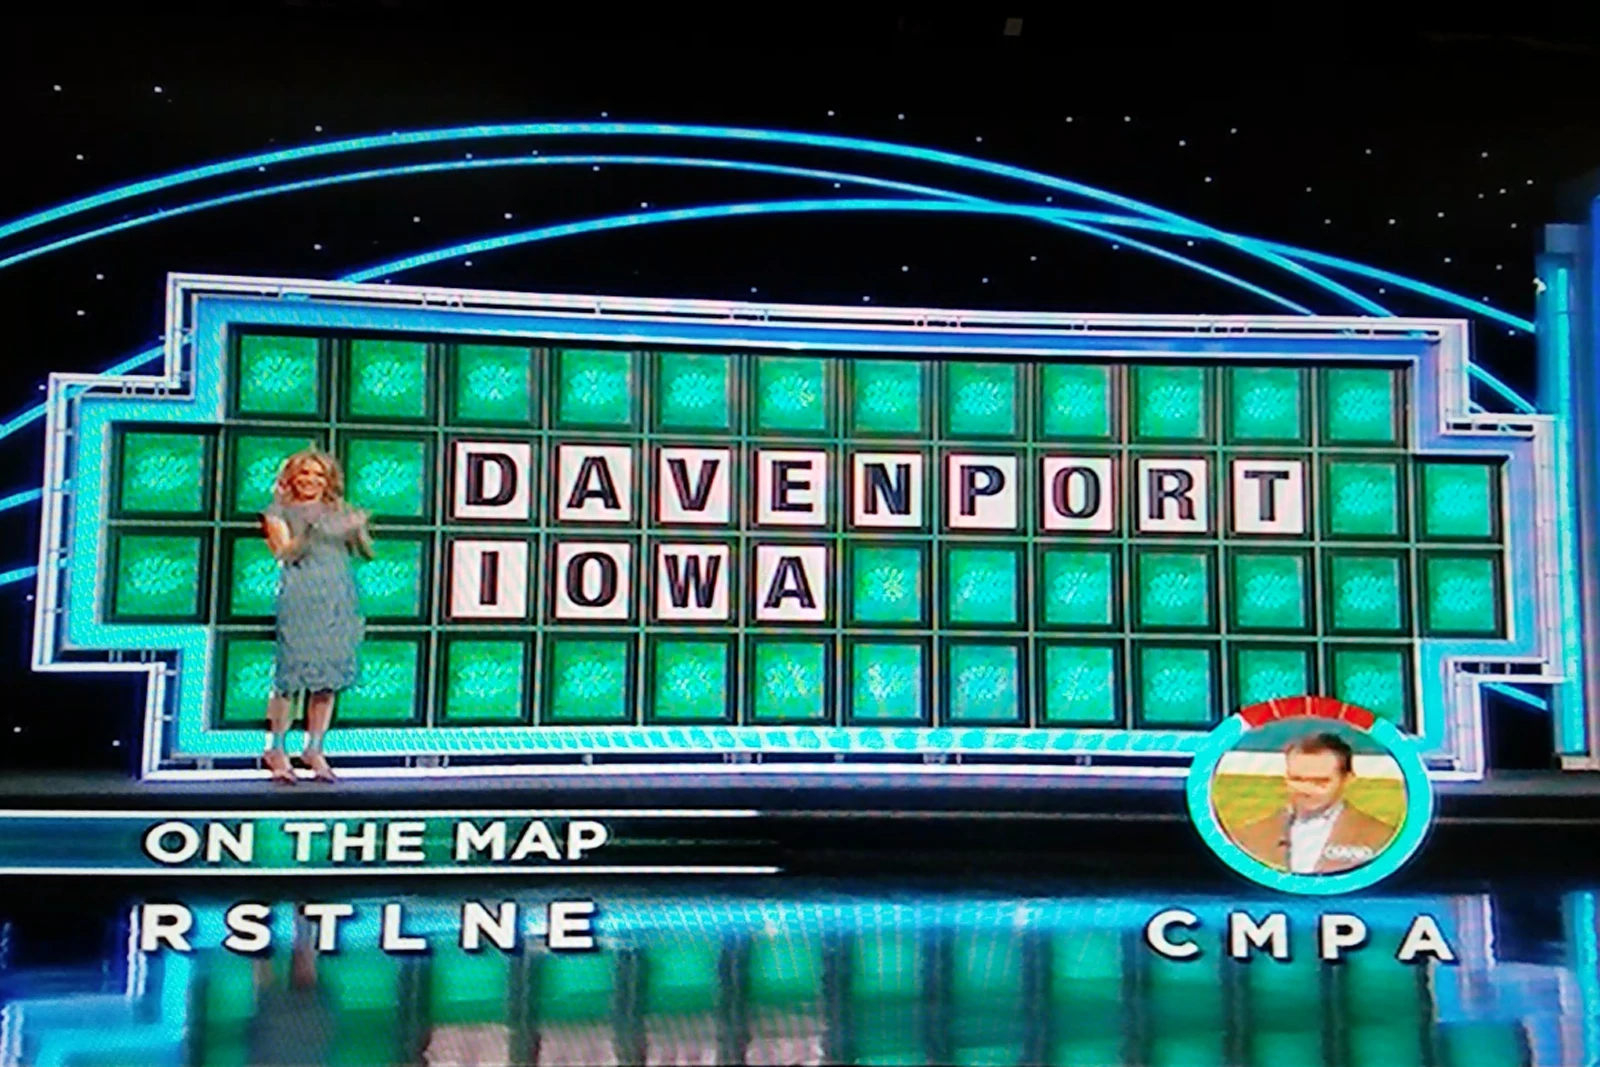 45 Years Ago Today ‘Wheel of Fortune’ Made its Debut